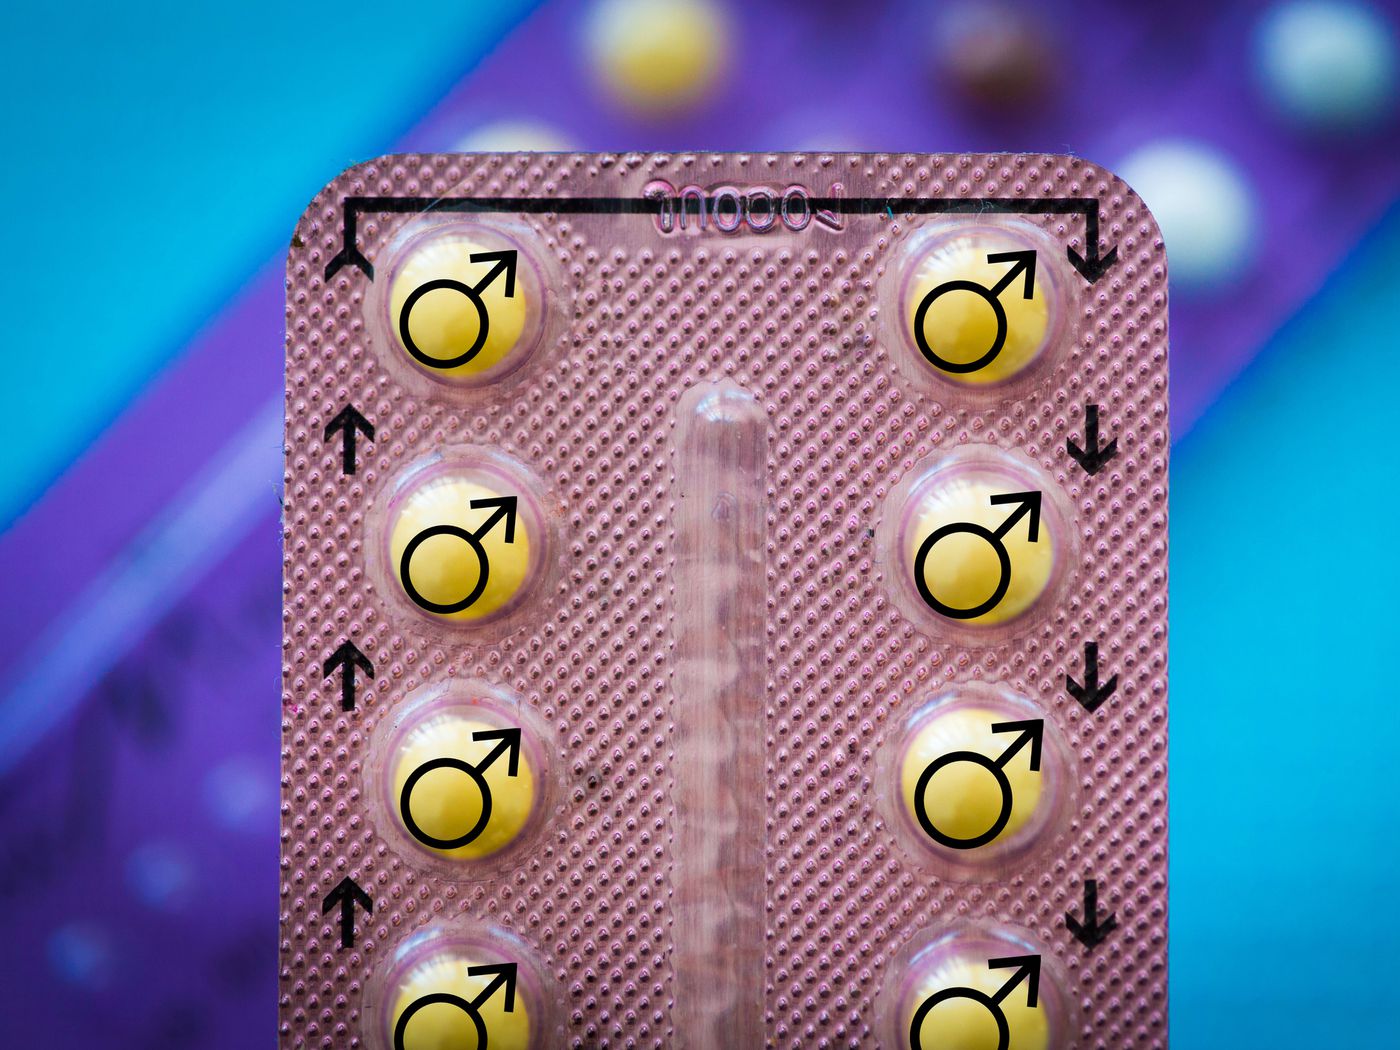 What's new in contraception? 5 exciting research innovations